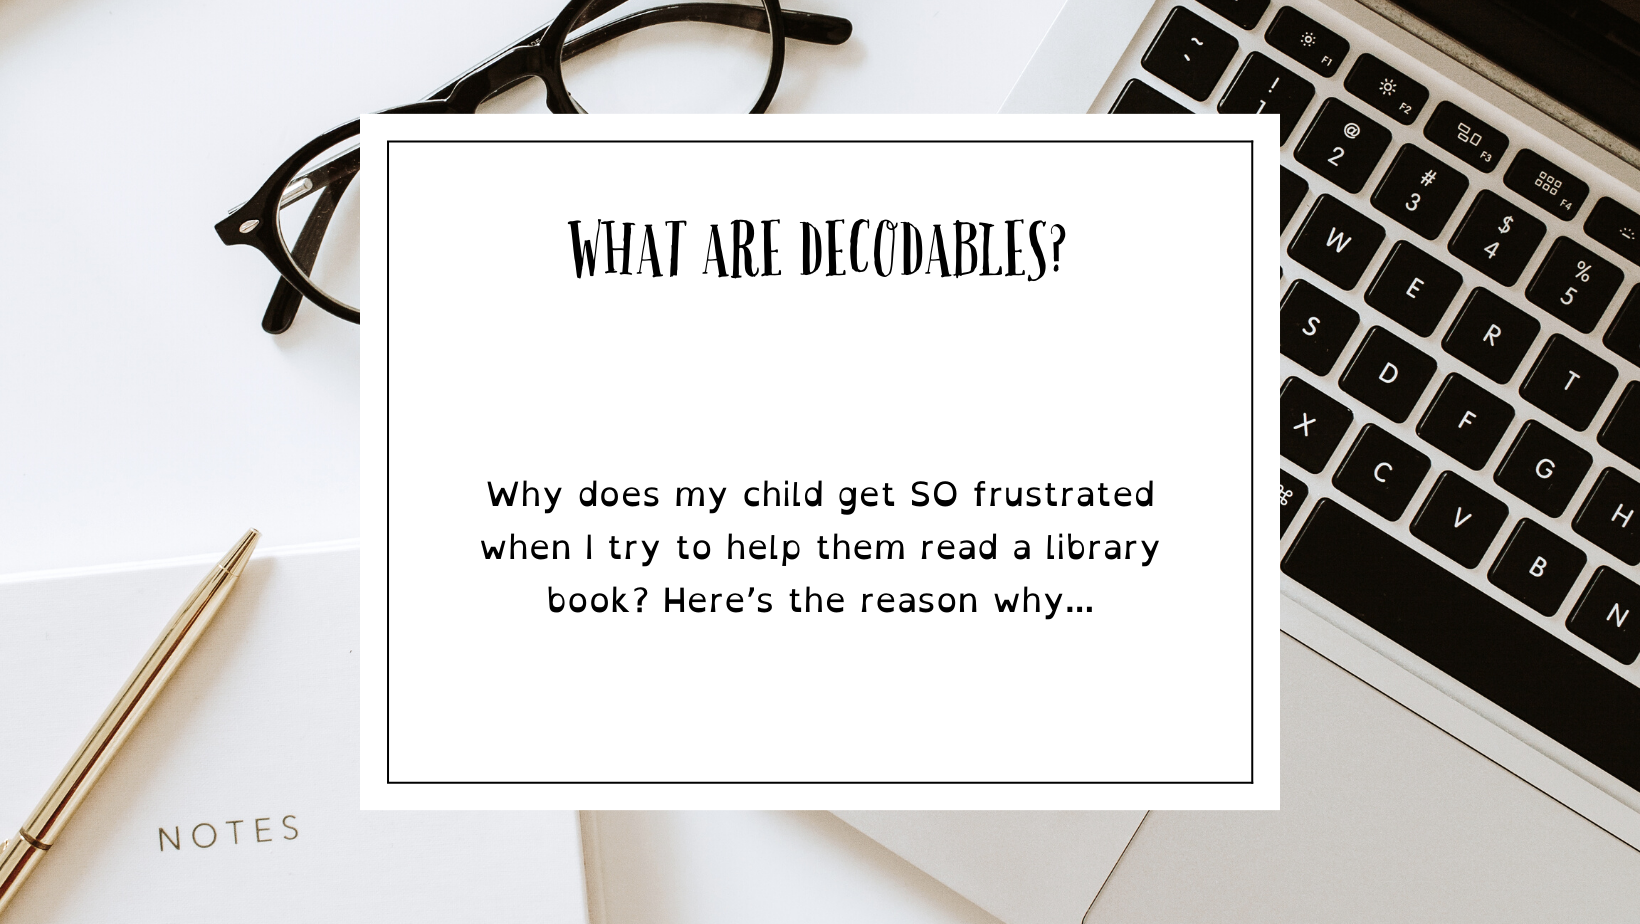 What are decodables?